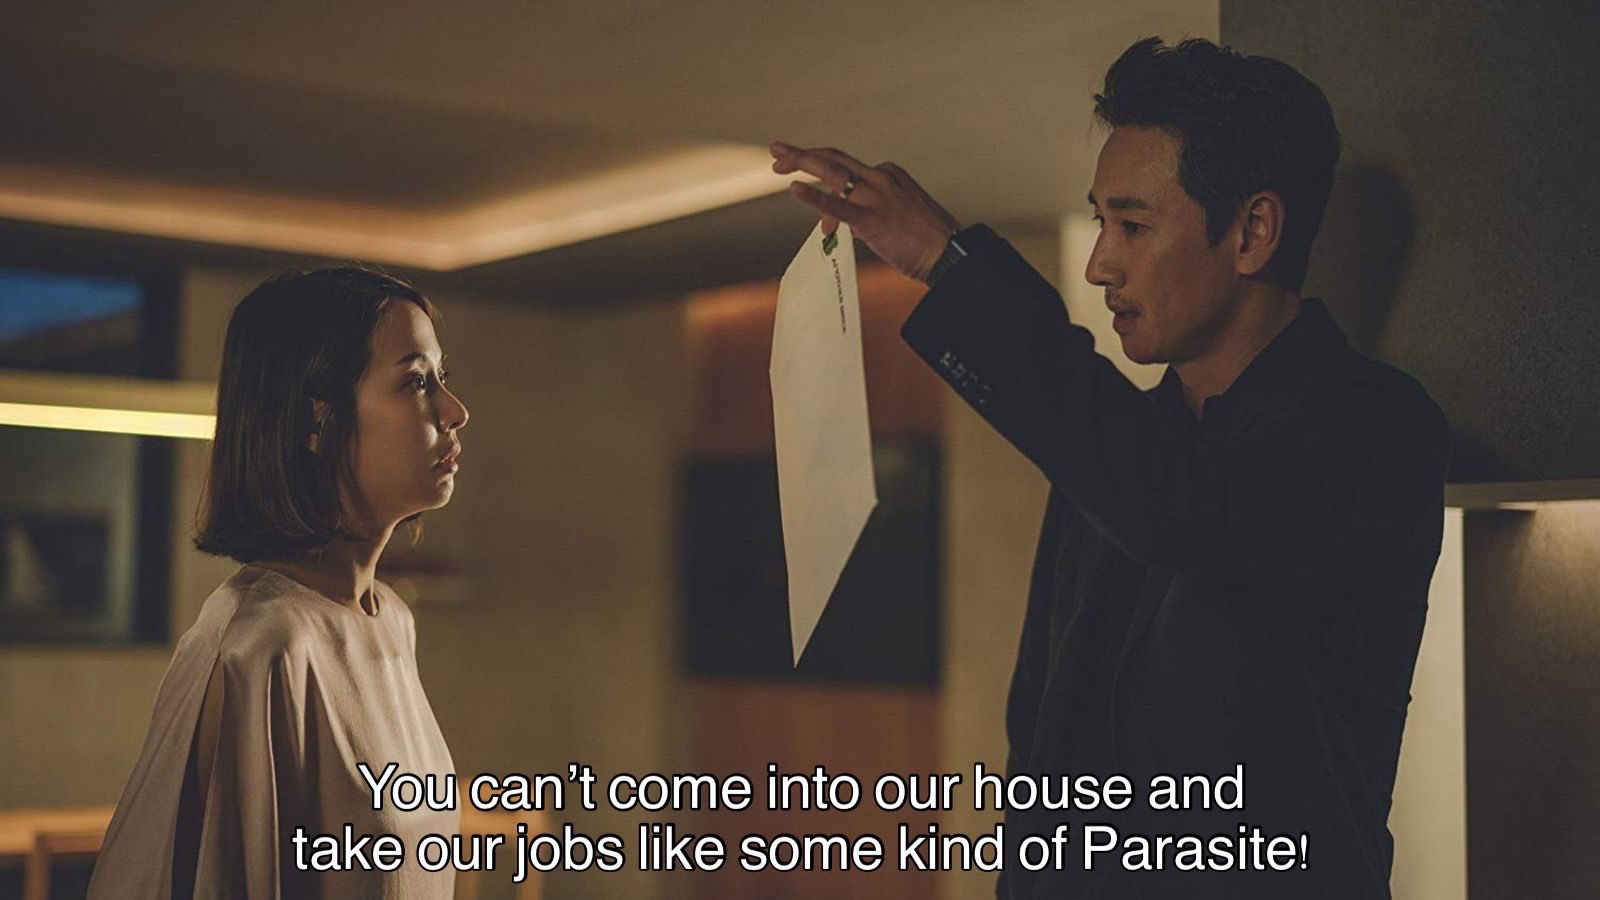 He Didn't Say That -Movie Titles in Movie Lines- lee sun kyun parasite - You can't come into our house and take our jobs some kind of Parasite!